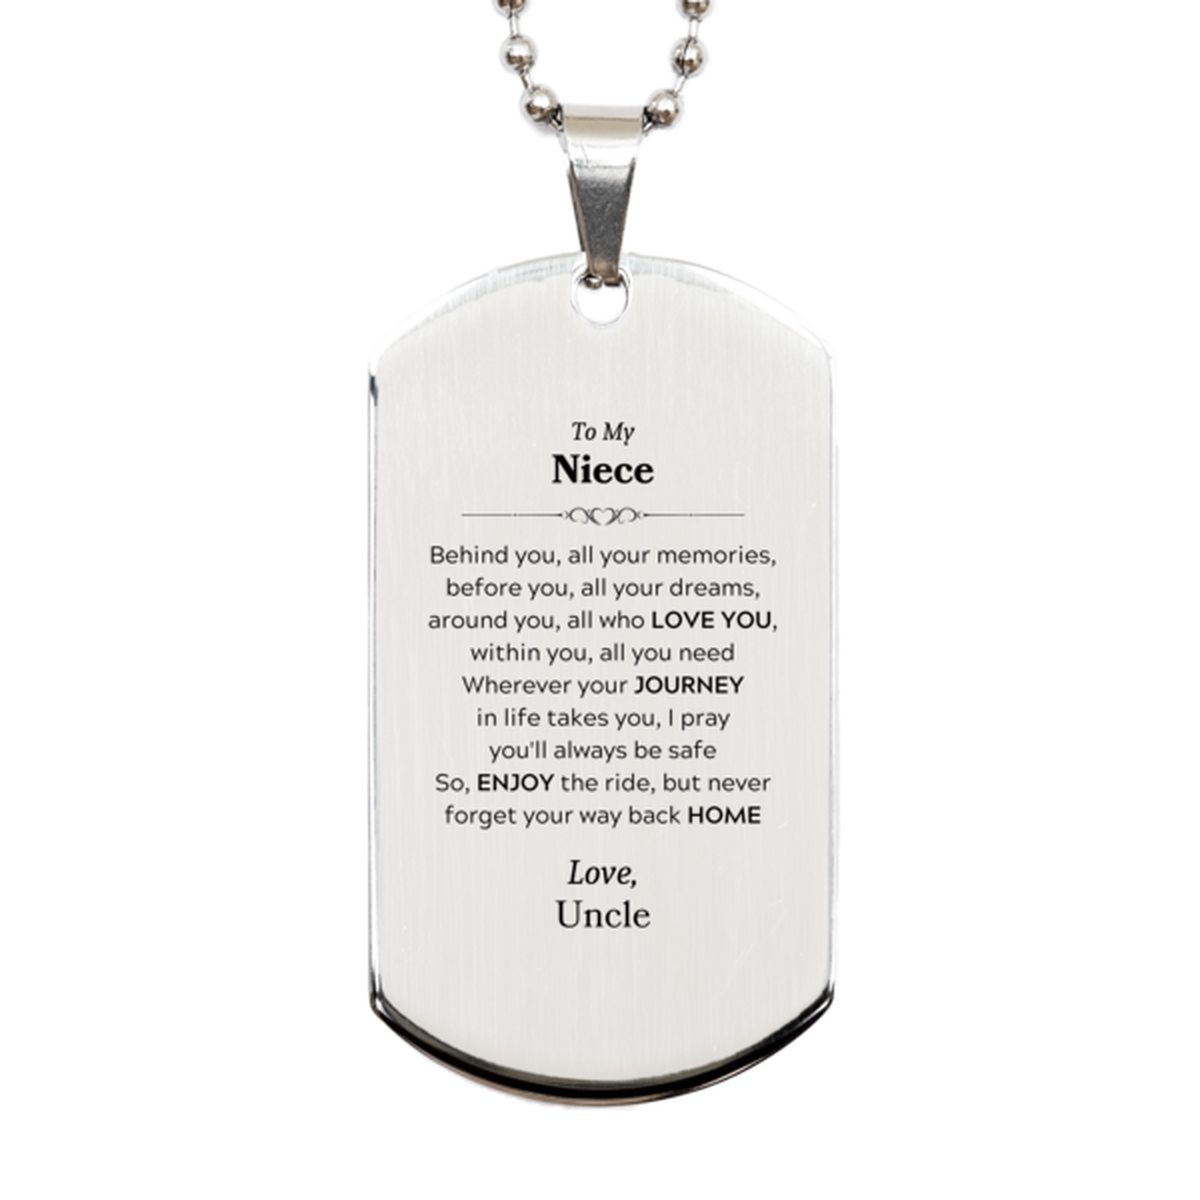 To My Niece Graduation Gifts from Uncle, Niece Silver Dog Tag Christmas Birthday Gifts for Niece Behind you, all your memories, before you, all your dreams. Love, Uncle